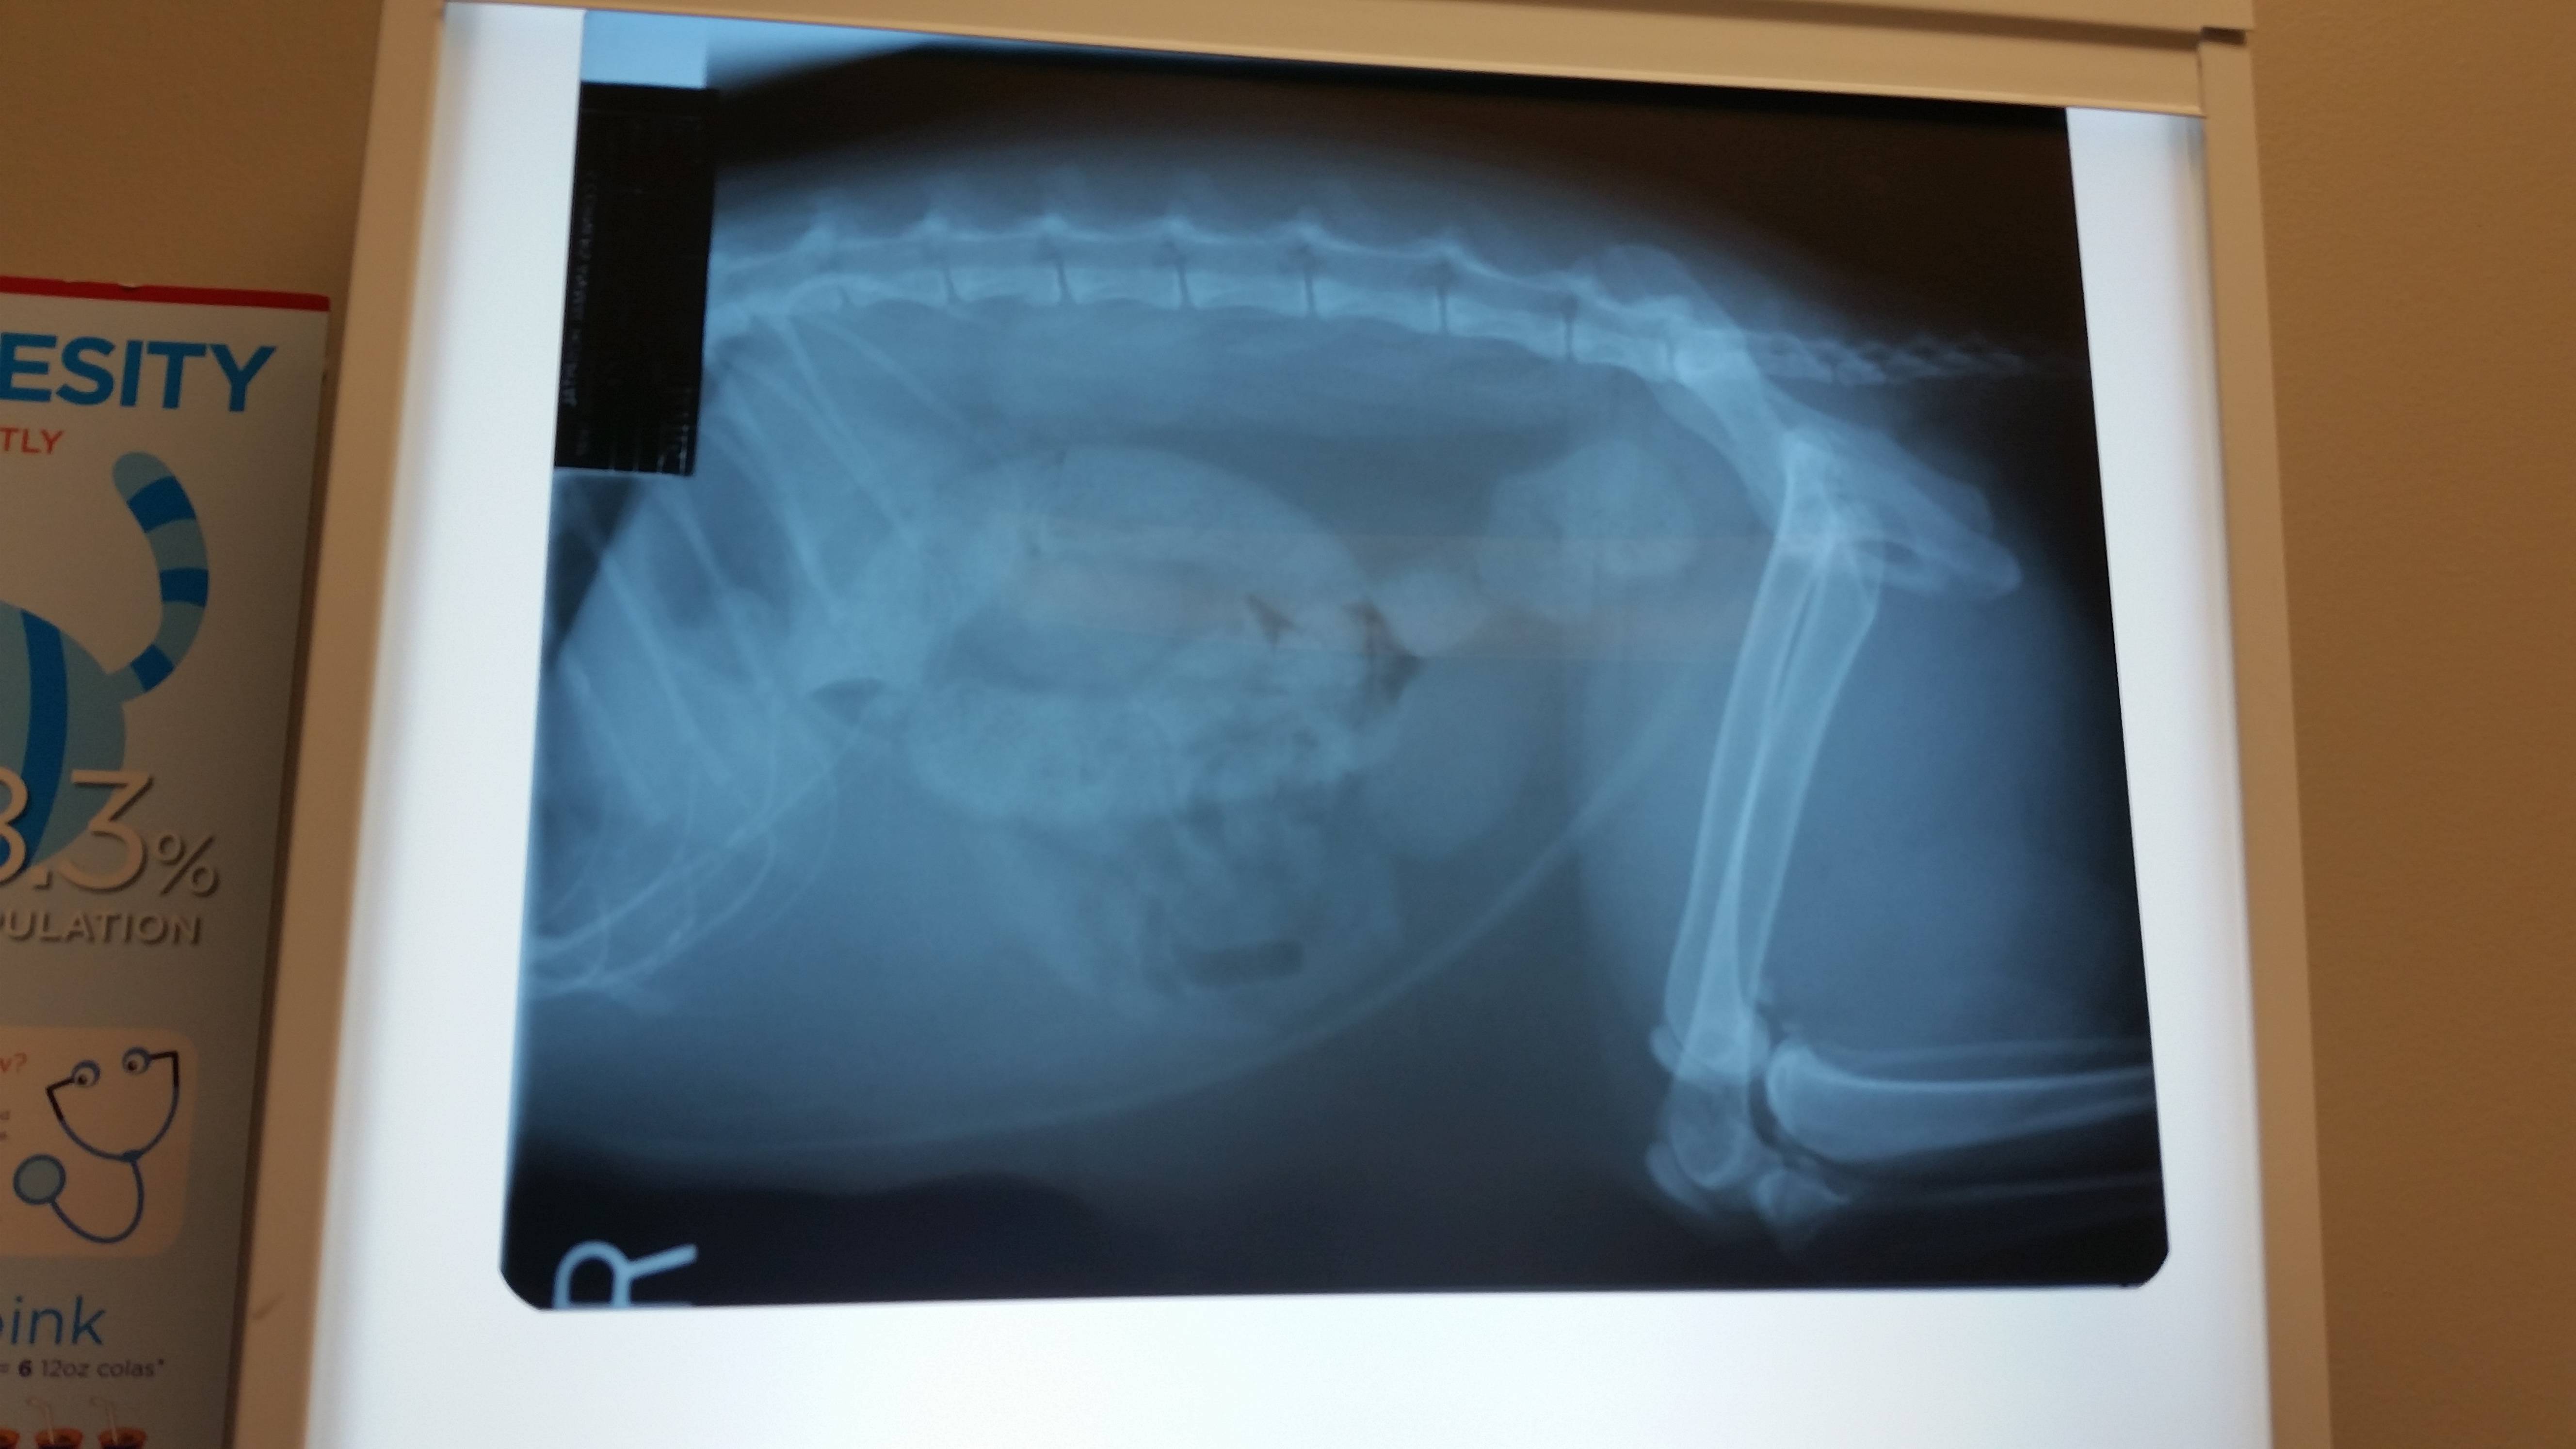 My dads cat was constipated. Here's the x-ray.